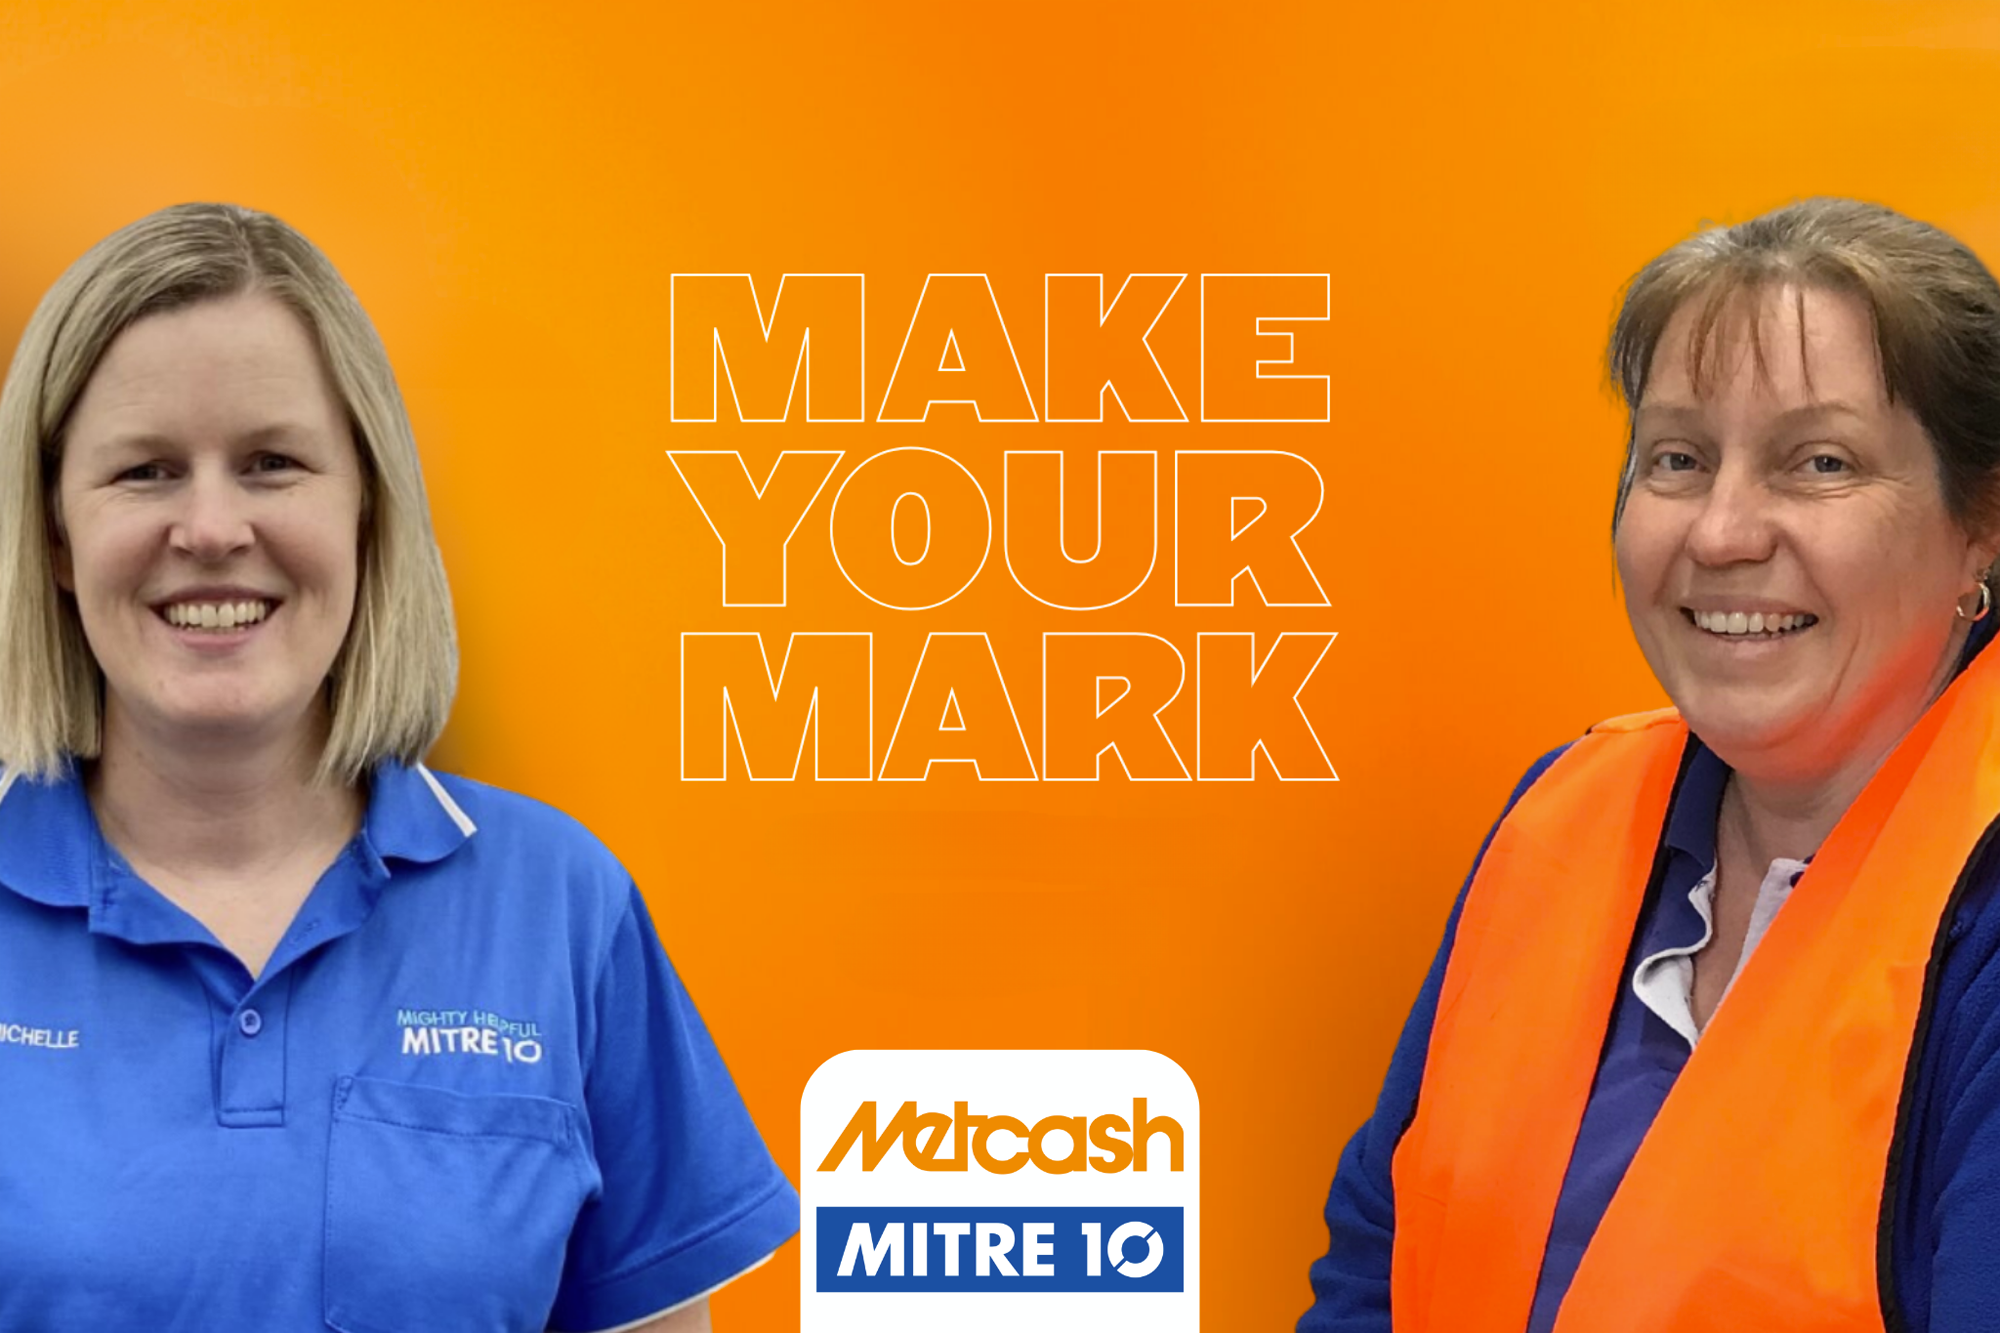 There’s Many Ways To Build Your Career In Retail At Mitre 10!